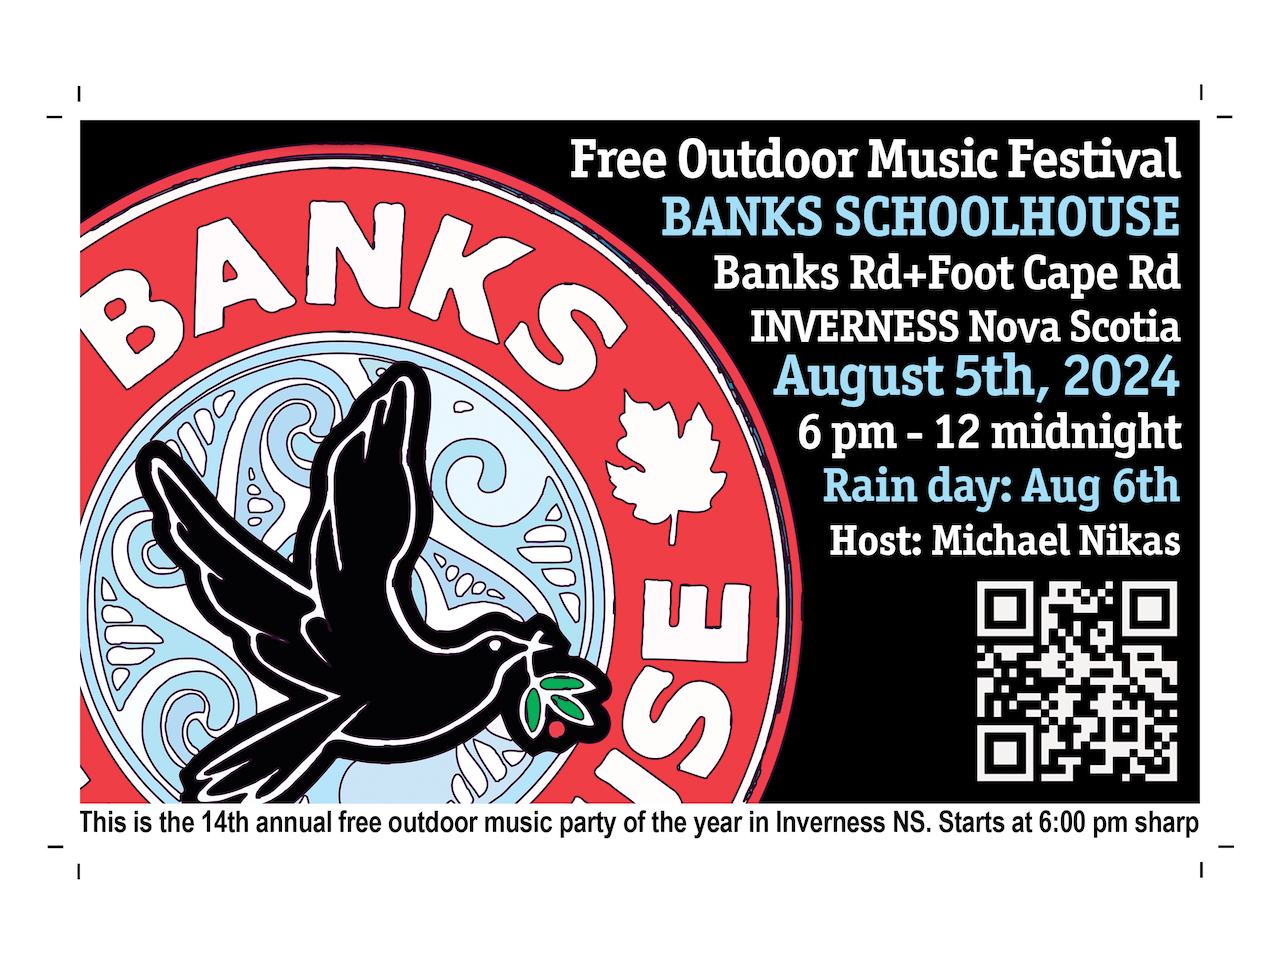 Free outdoor music festival. Banks Schoolhouse. Banks Rd + Foot Cape Rd Inverness Nova Scotia. August 5th, 2024. 6pm - 12 midnight. Rain day: Aug 6th. Host: Michael Nikas. This is the 14th annual free outdoor music party of the year in Inverness NS. Starts at 6:00 pm sharp.